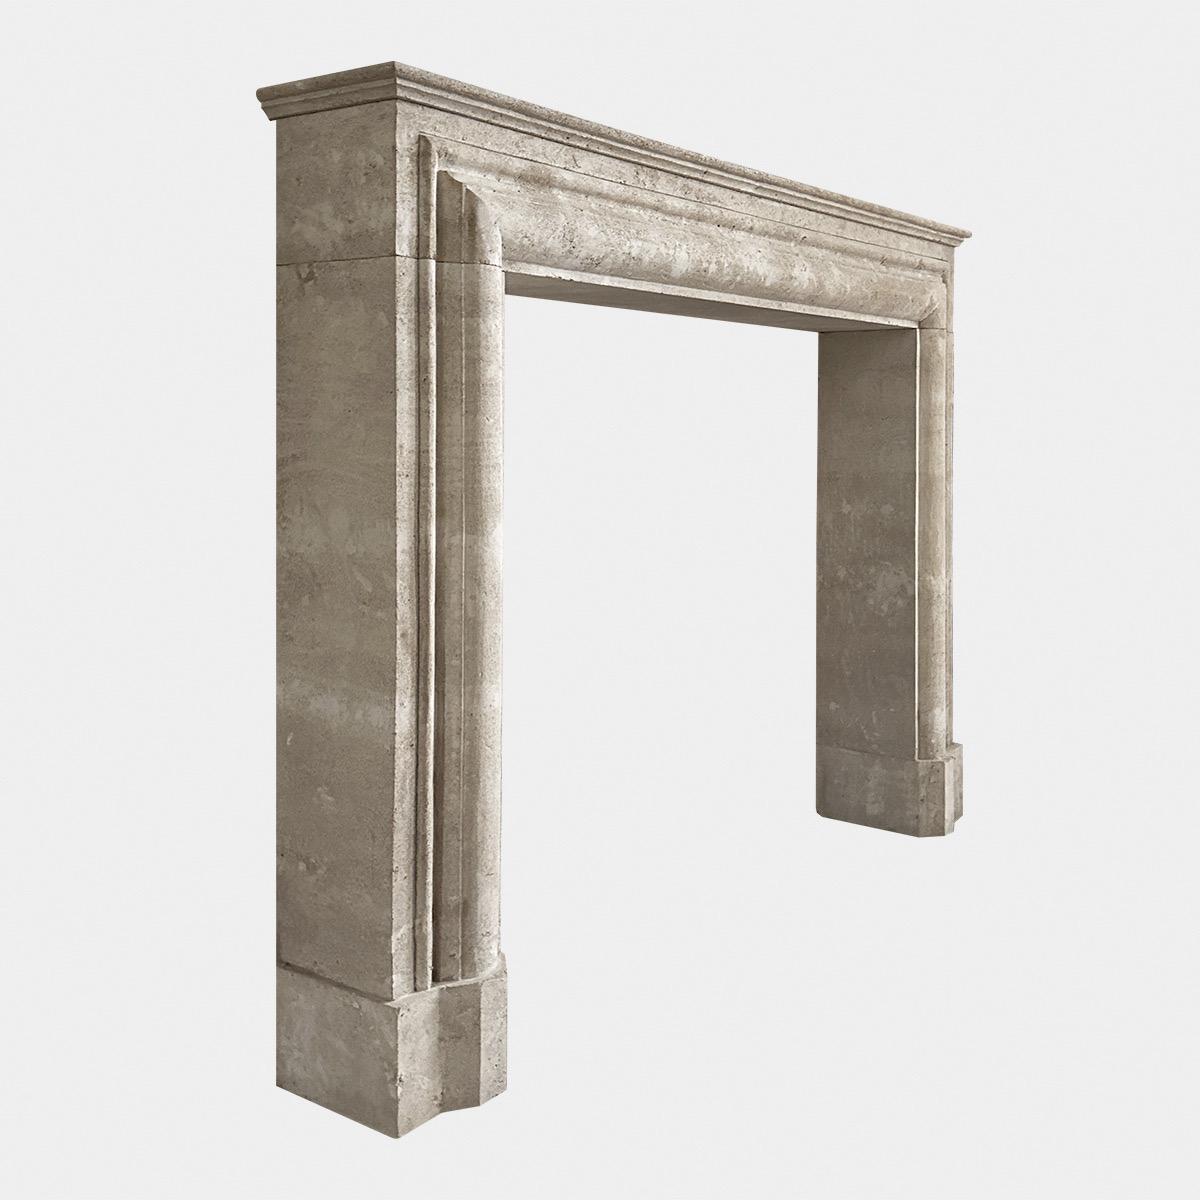 A large Italian Bolection fireplace in Italian Travertine stone. Carved in generous proportions, with a graduating bolection profile, with deep jambs and header. Stood on shaped foot blocks, with a simple mantle above. Can also be used without the